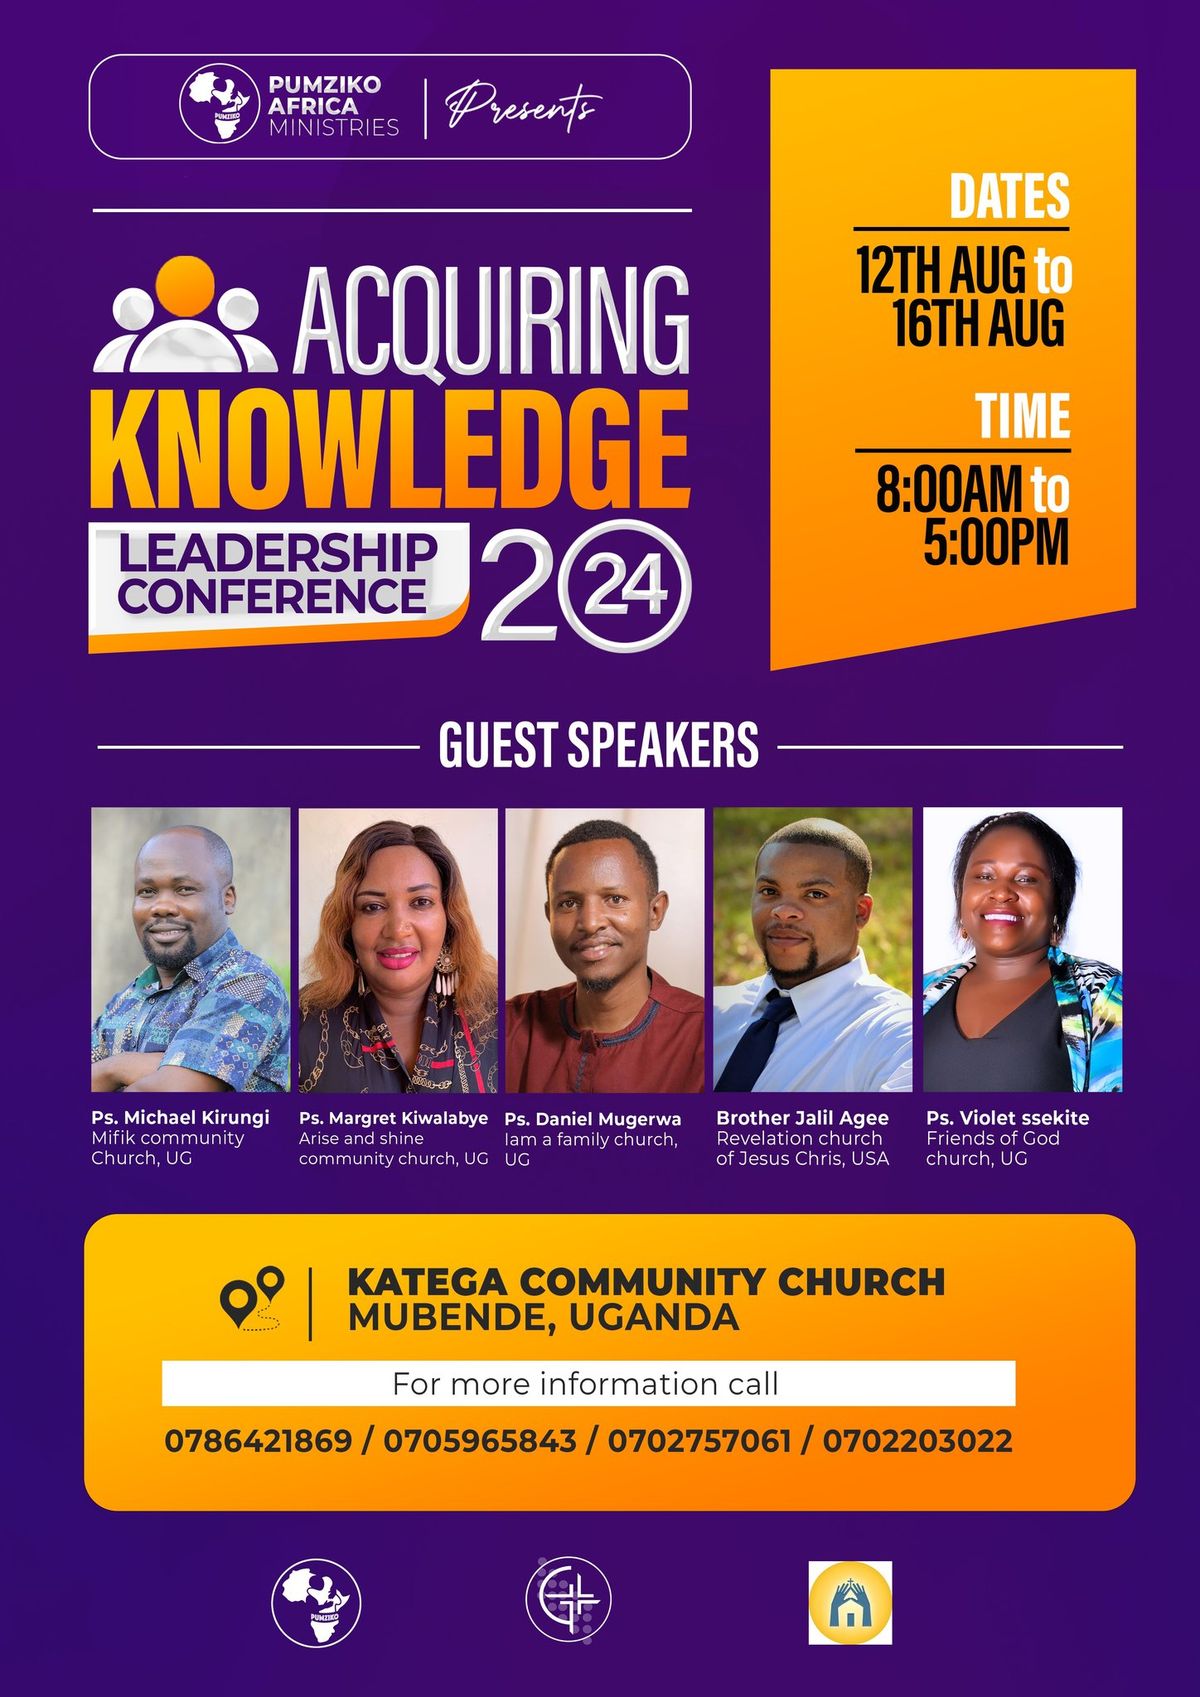 Acquiring knowledge leadership conference